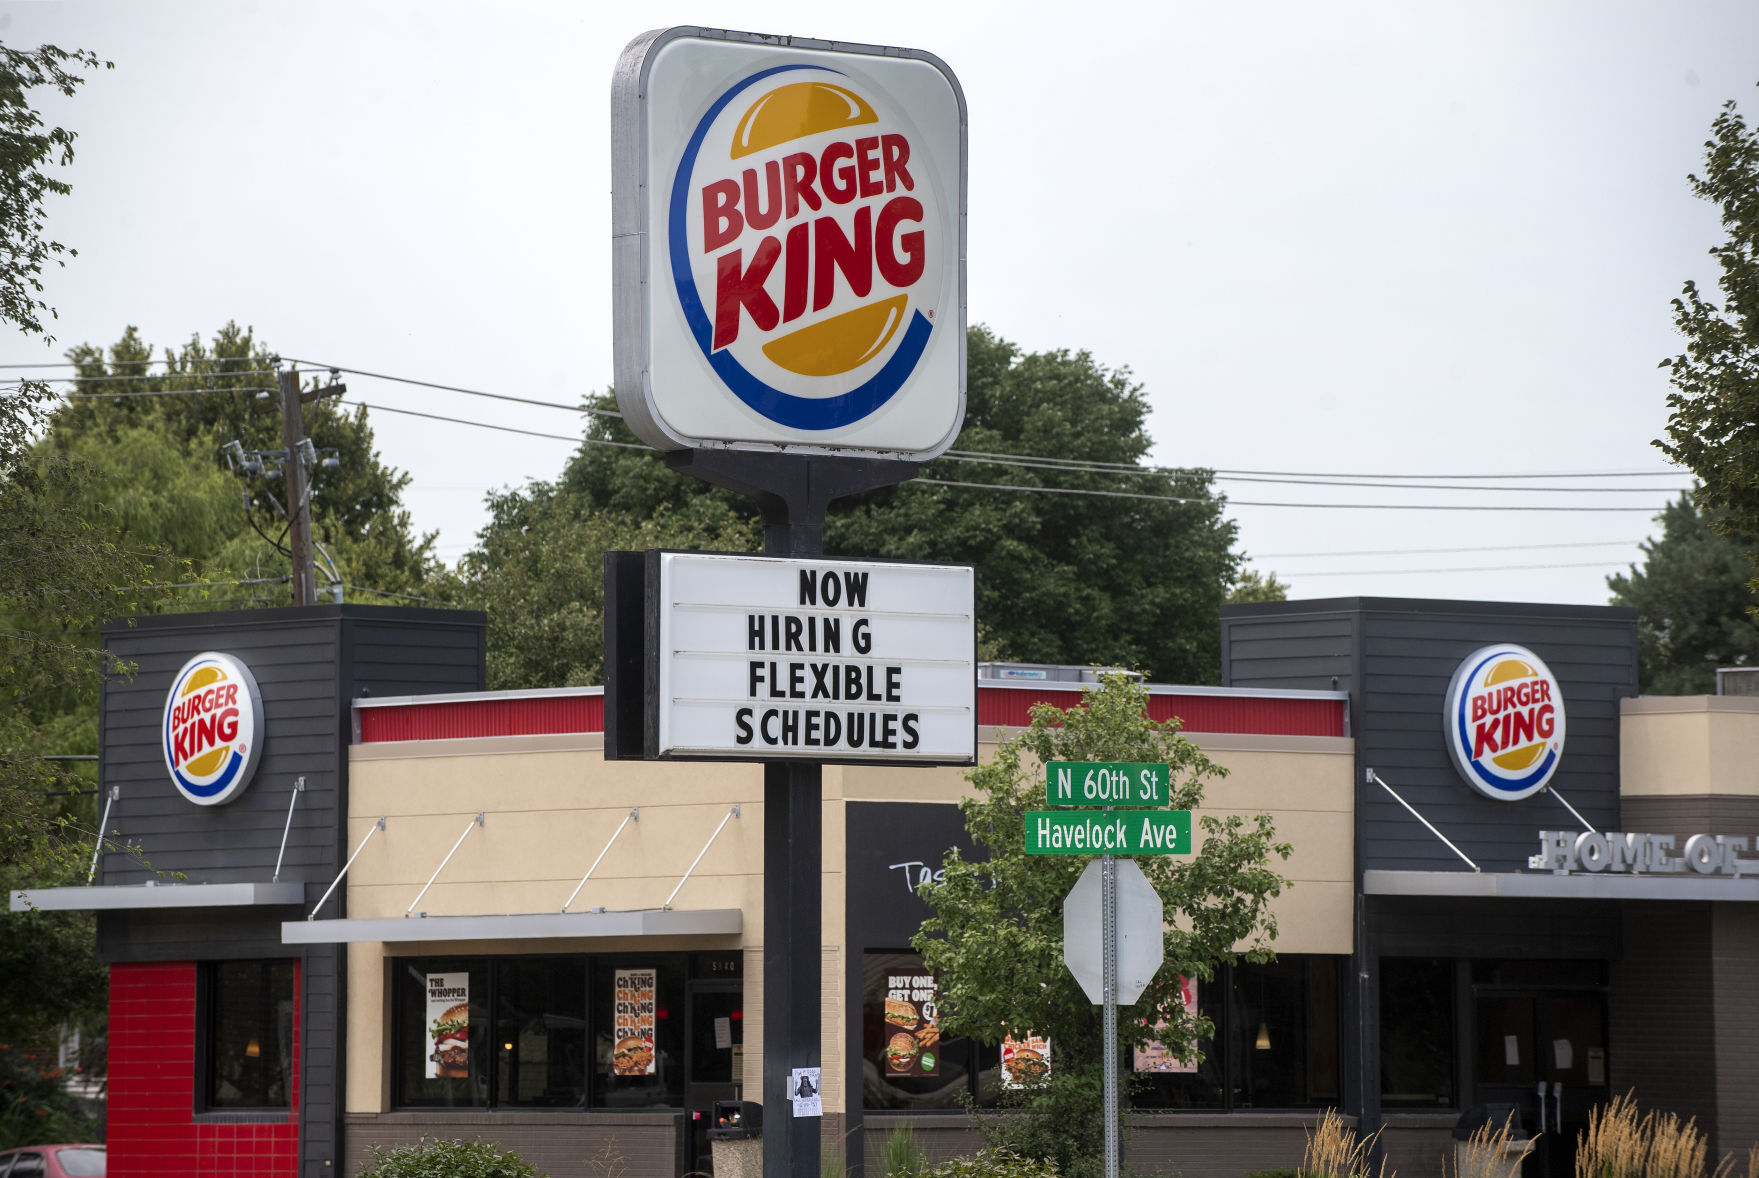 Owner of Lincoln Burger King restaurants files for bankruptcy pic pic